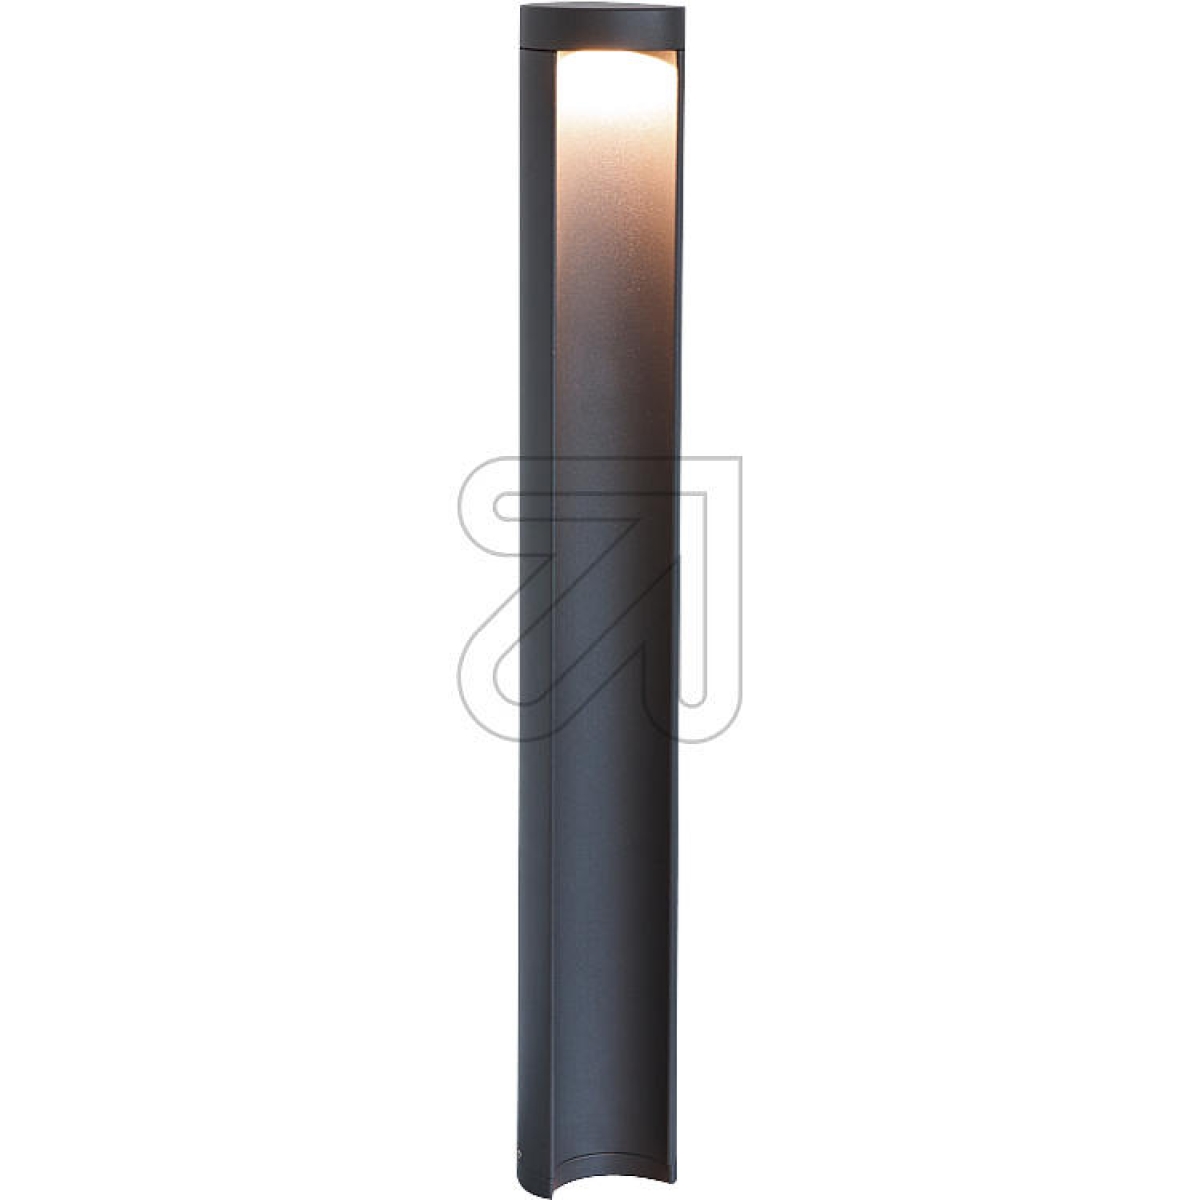 EVNLED path light anthracite 7W 3000K C54151702PArticle-No: 628235